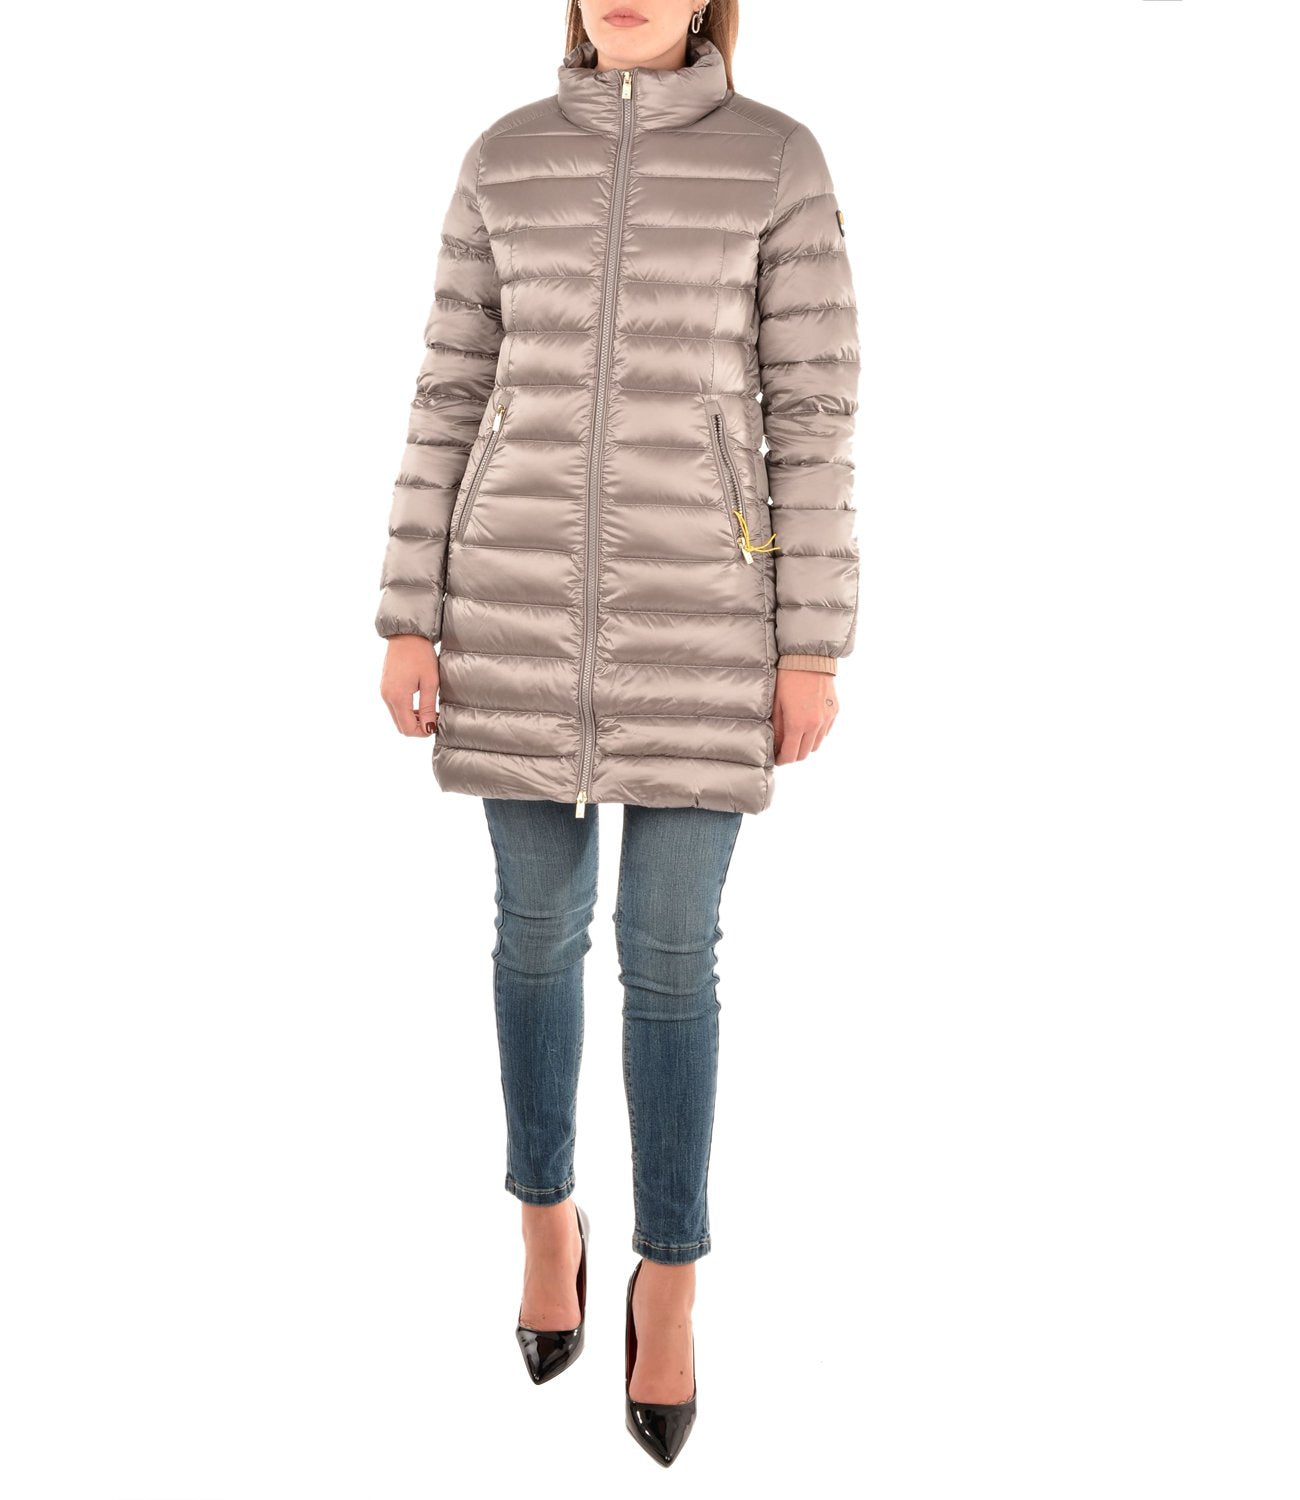 Women's shiny quilted down jacket